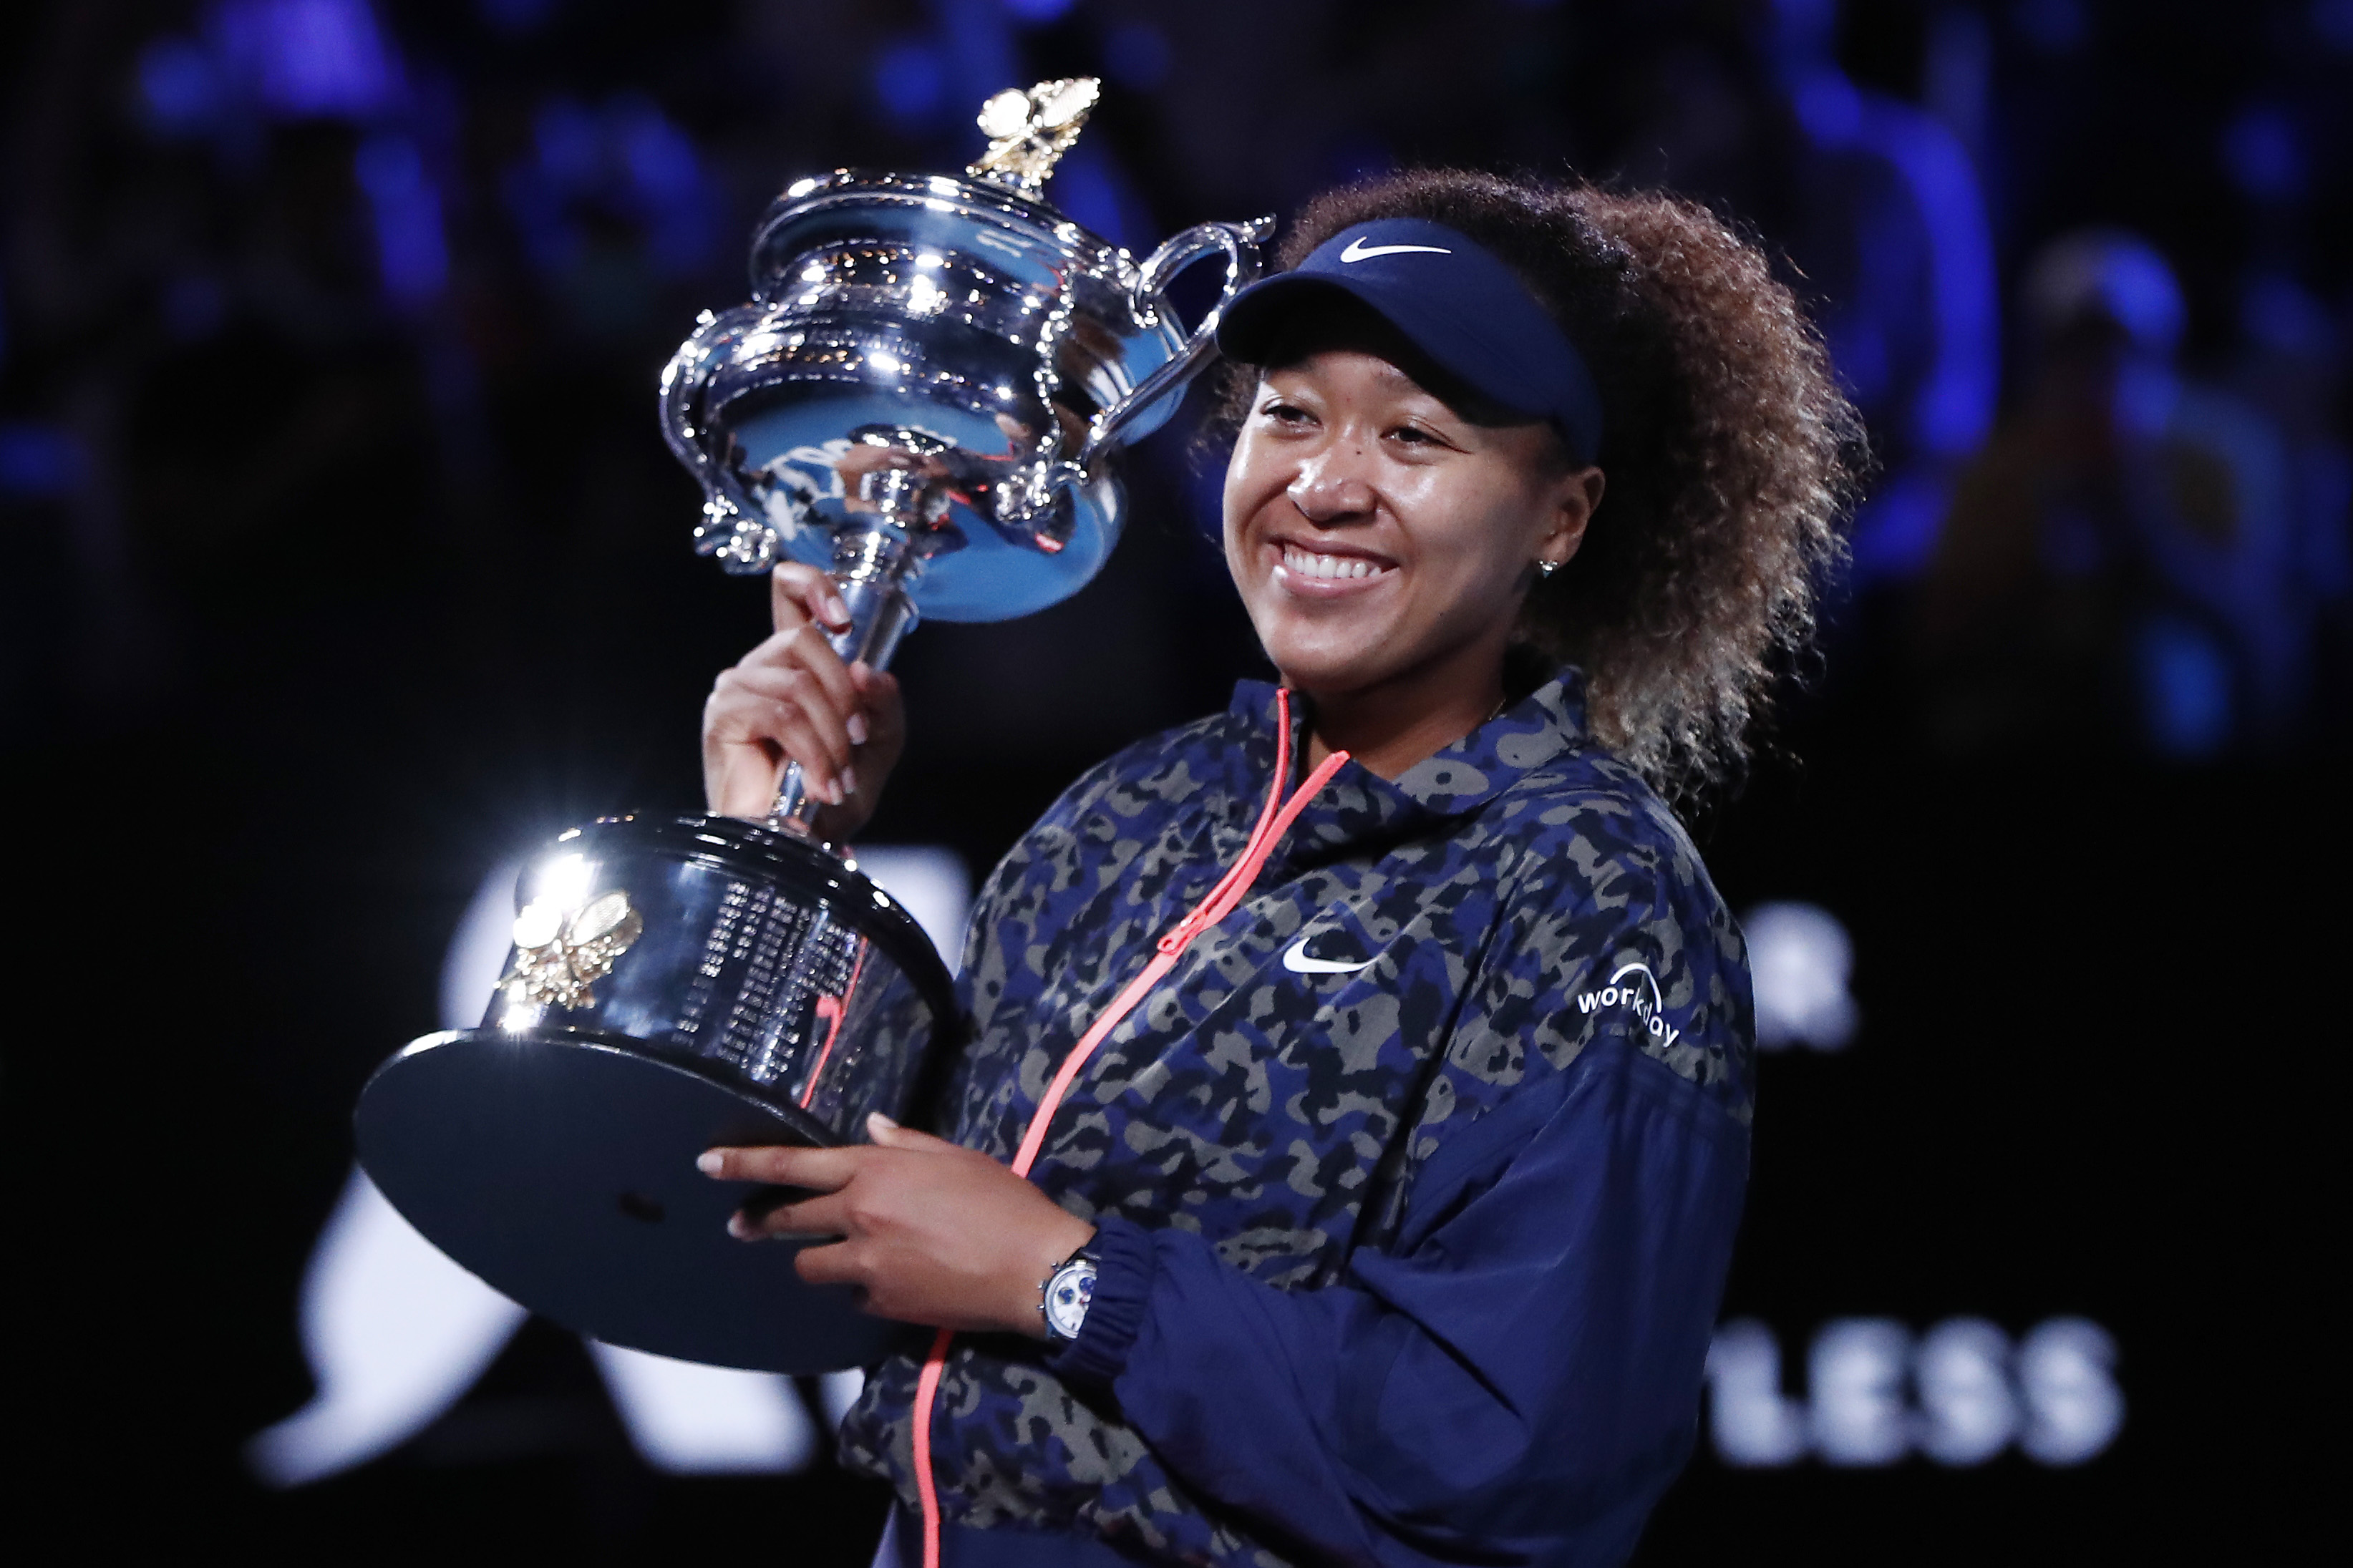 Naomi Osaka poses with the Daphne Akhurst Memorial Cup after winning the Australian Open